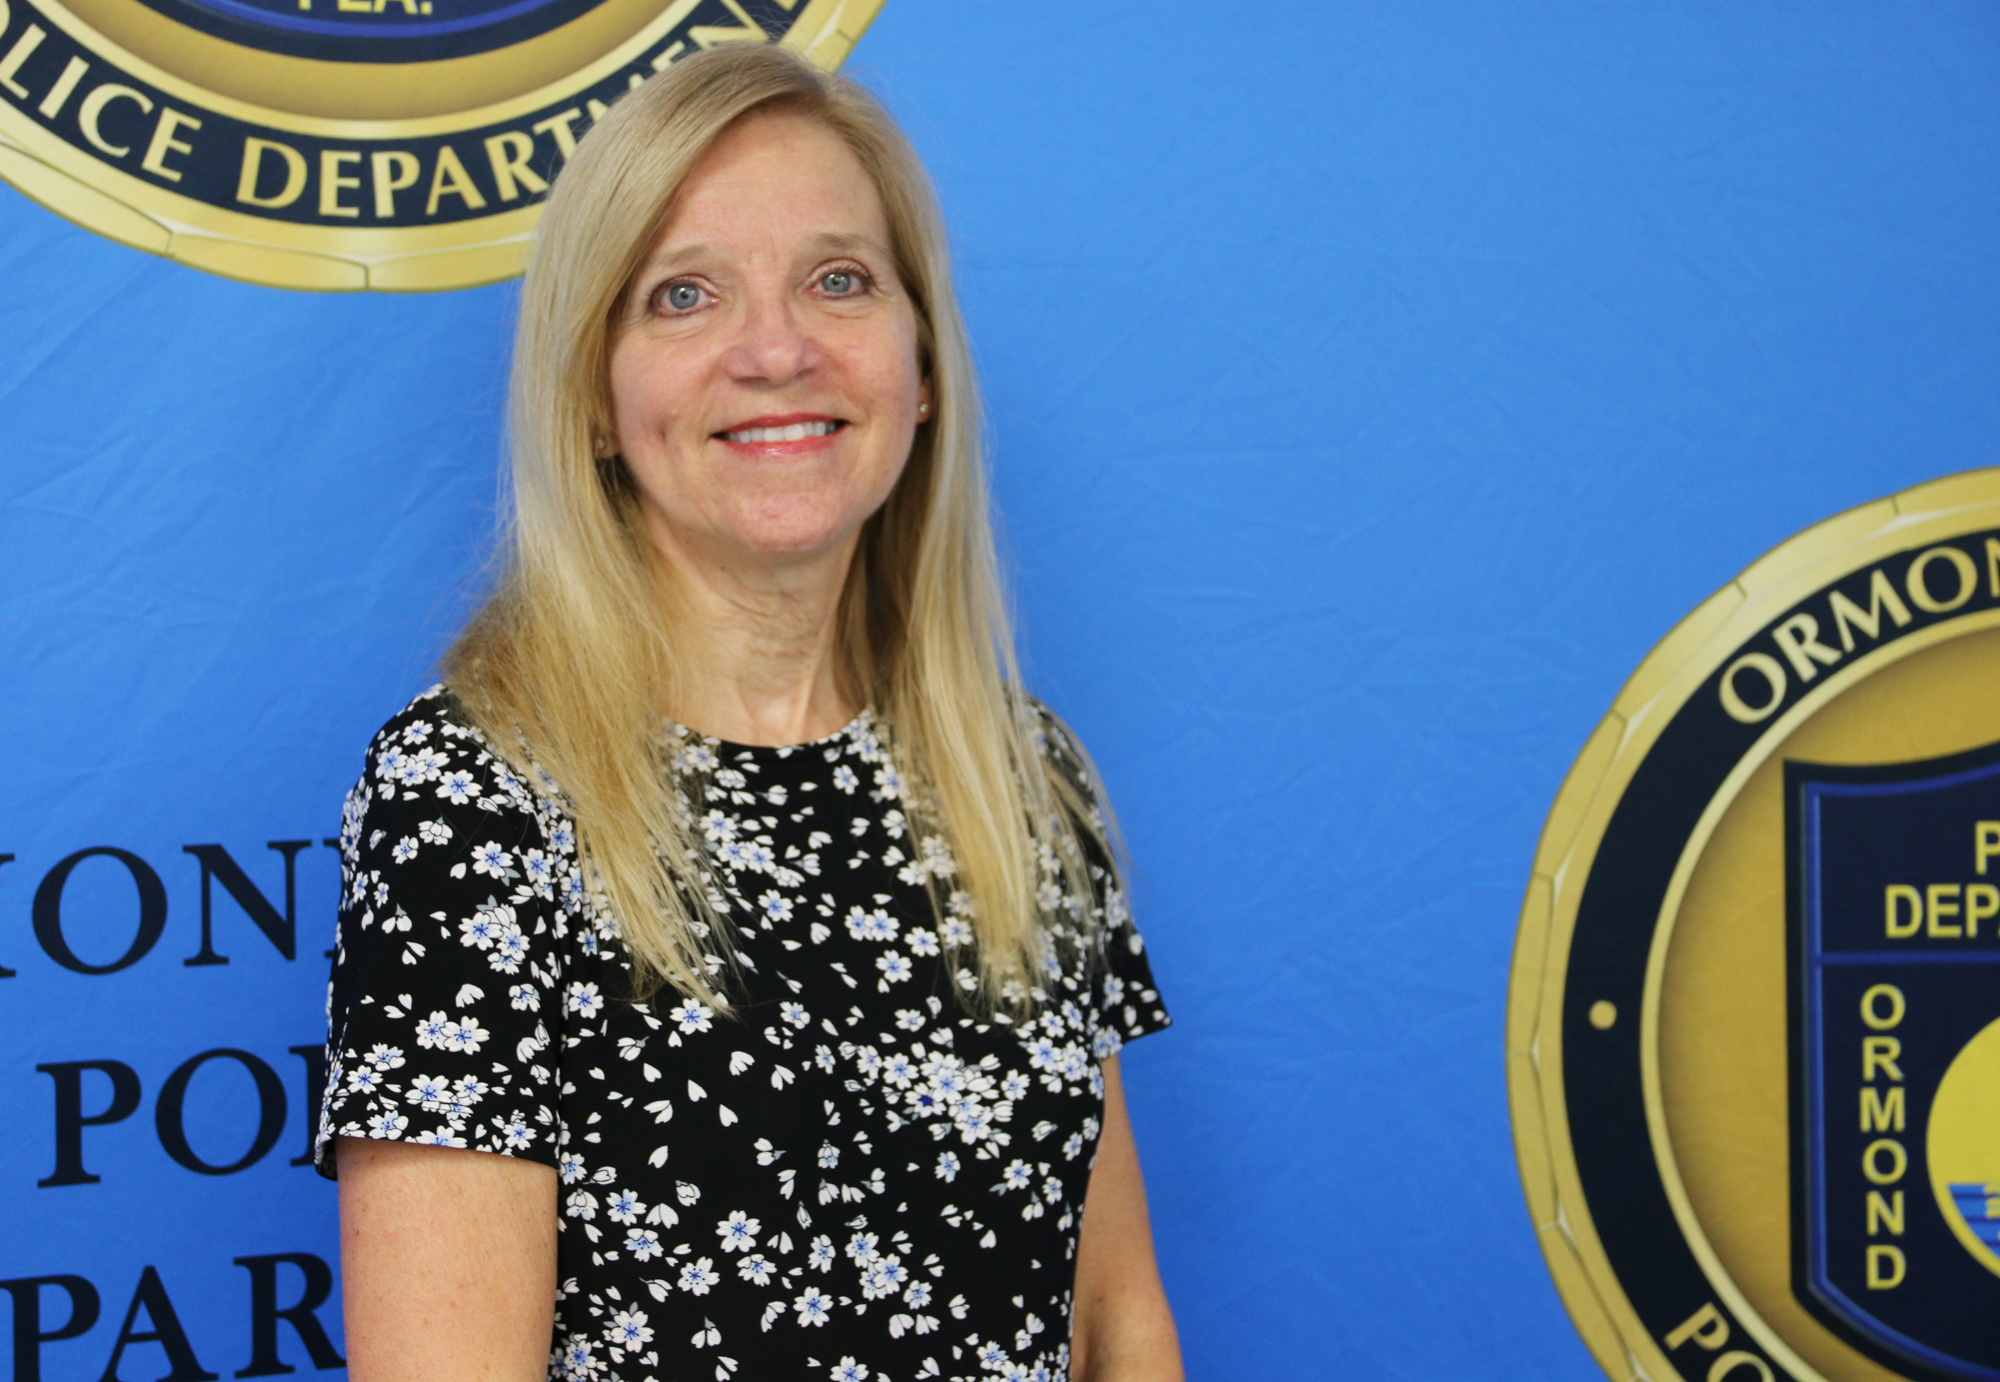 OBPD Office Manager Sandy Smith was one of our Standing O nominees in 2021, and nominated Shannon Champion for going above her normal work duties most every day. File photo